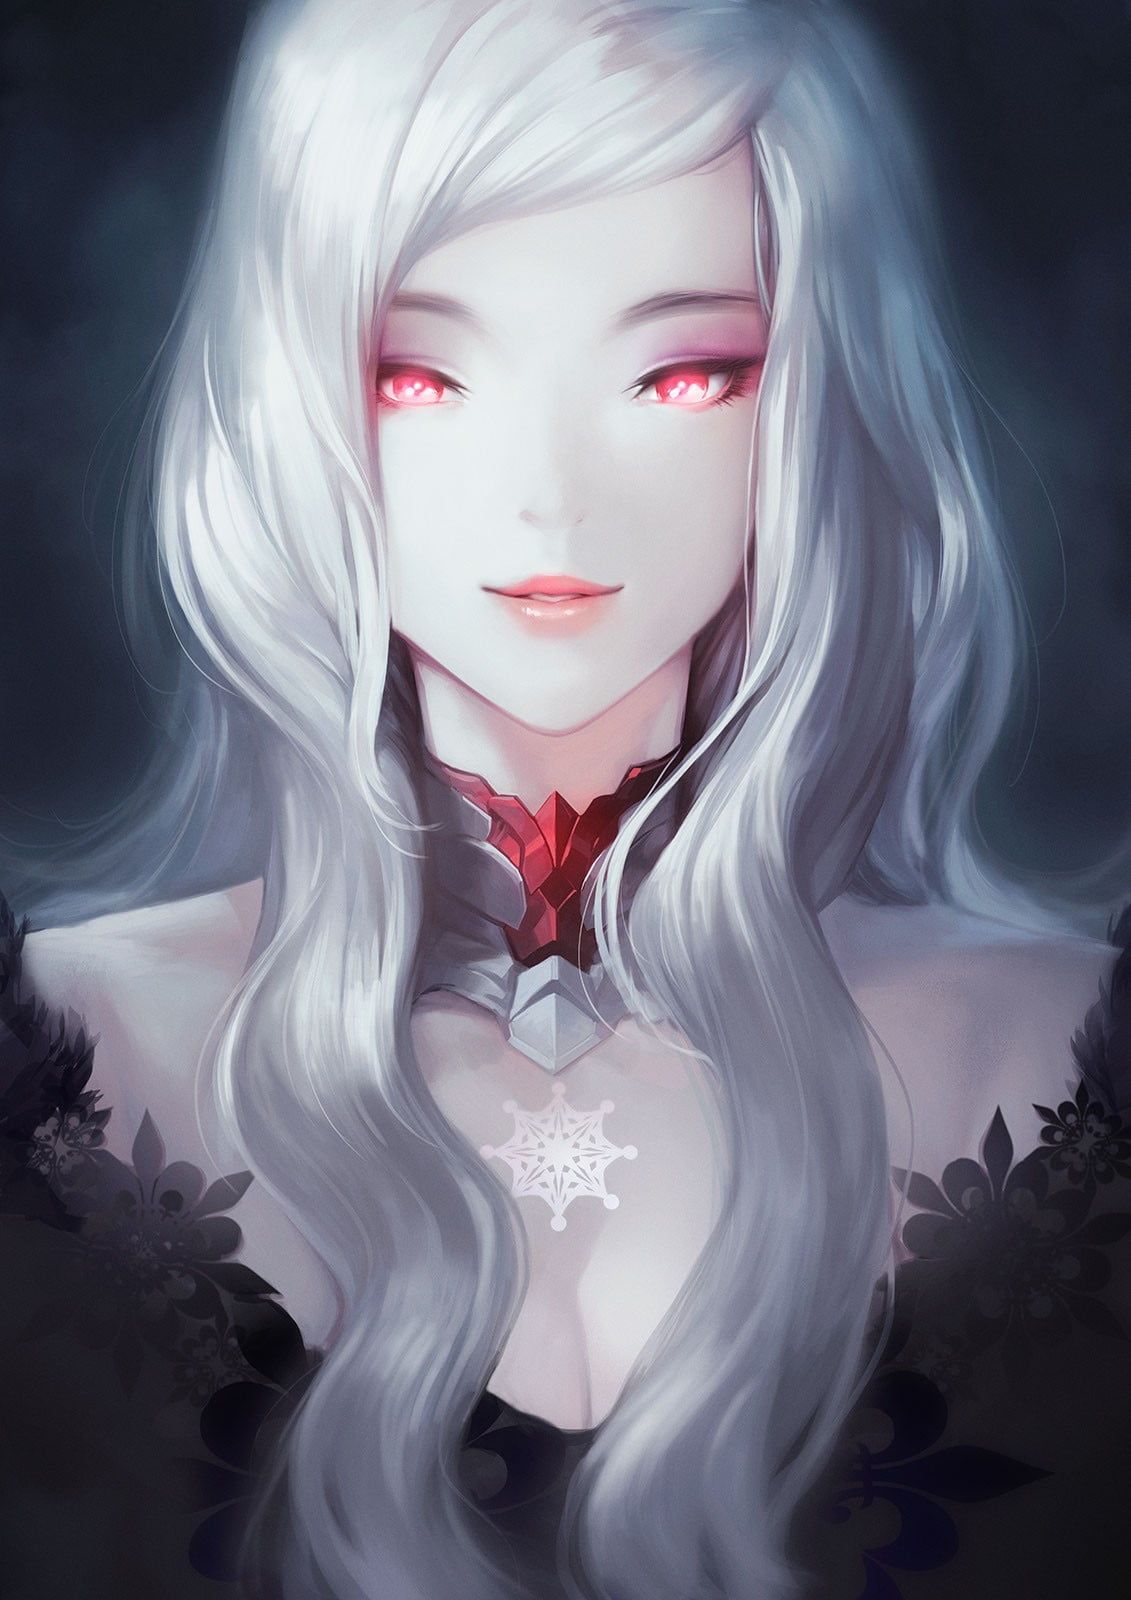 Gray haired female anime character, red eyes, white hair, portrait